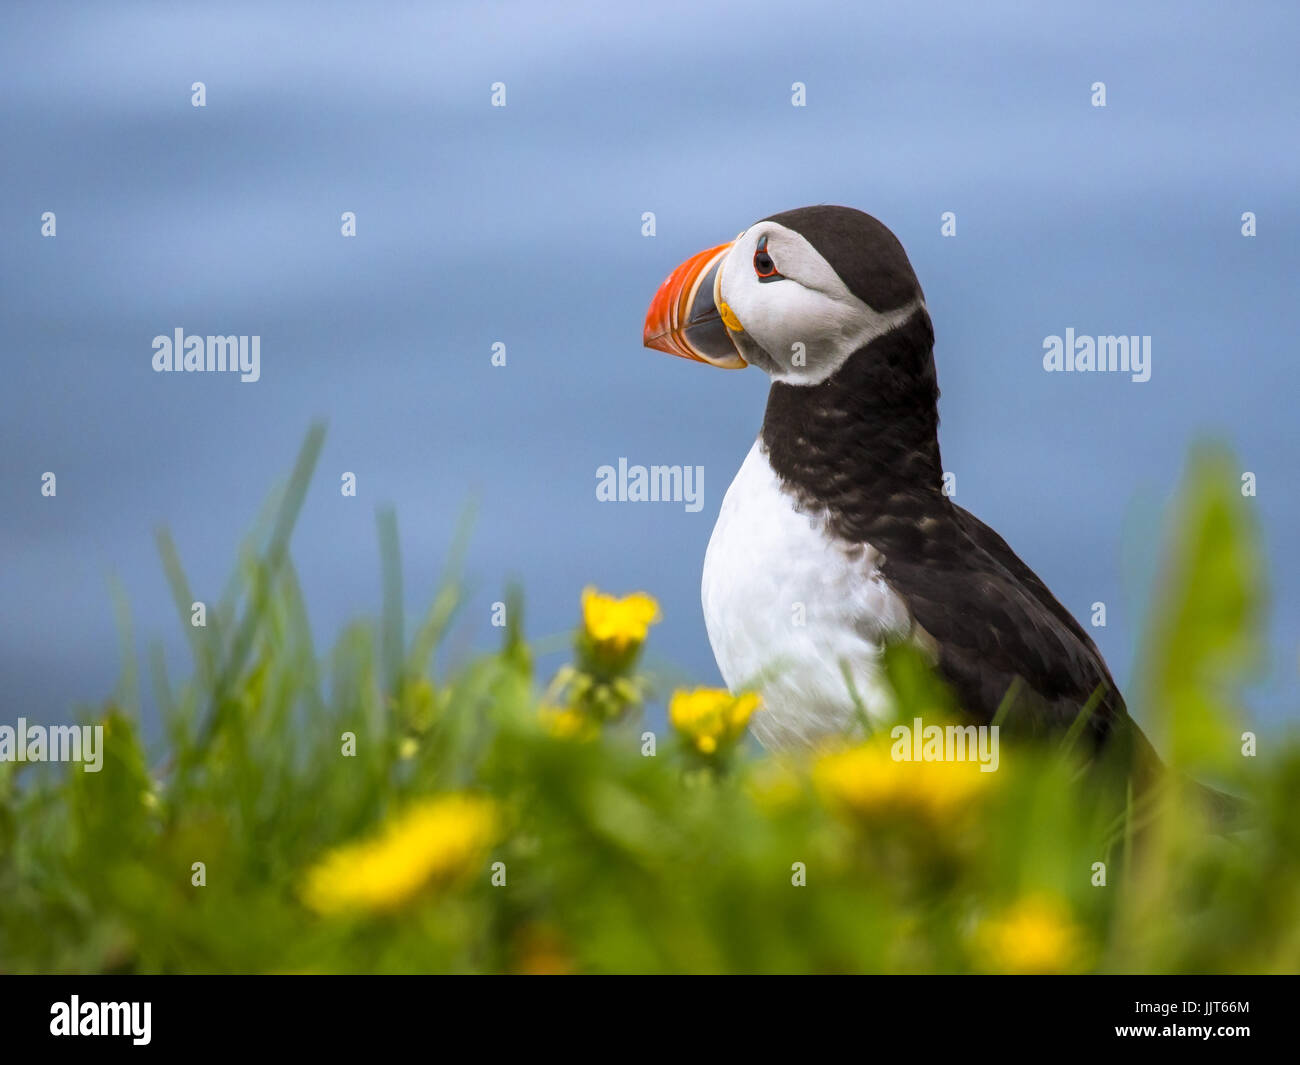 Nice close up of an Atlantic puffin between flowers at the Puffin colony near Borgarfjordur Eystri, Iceland. Stock Photo